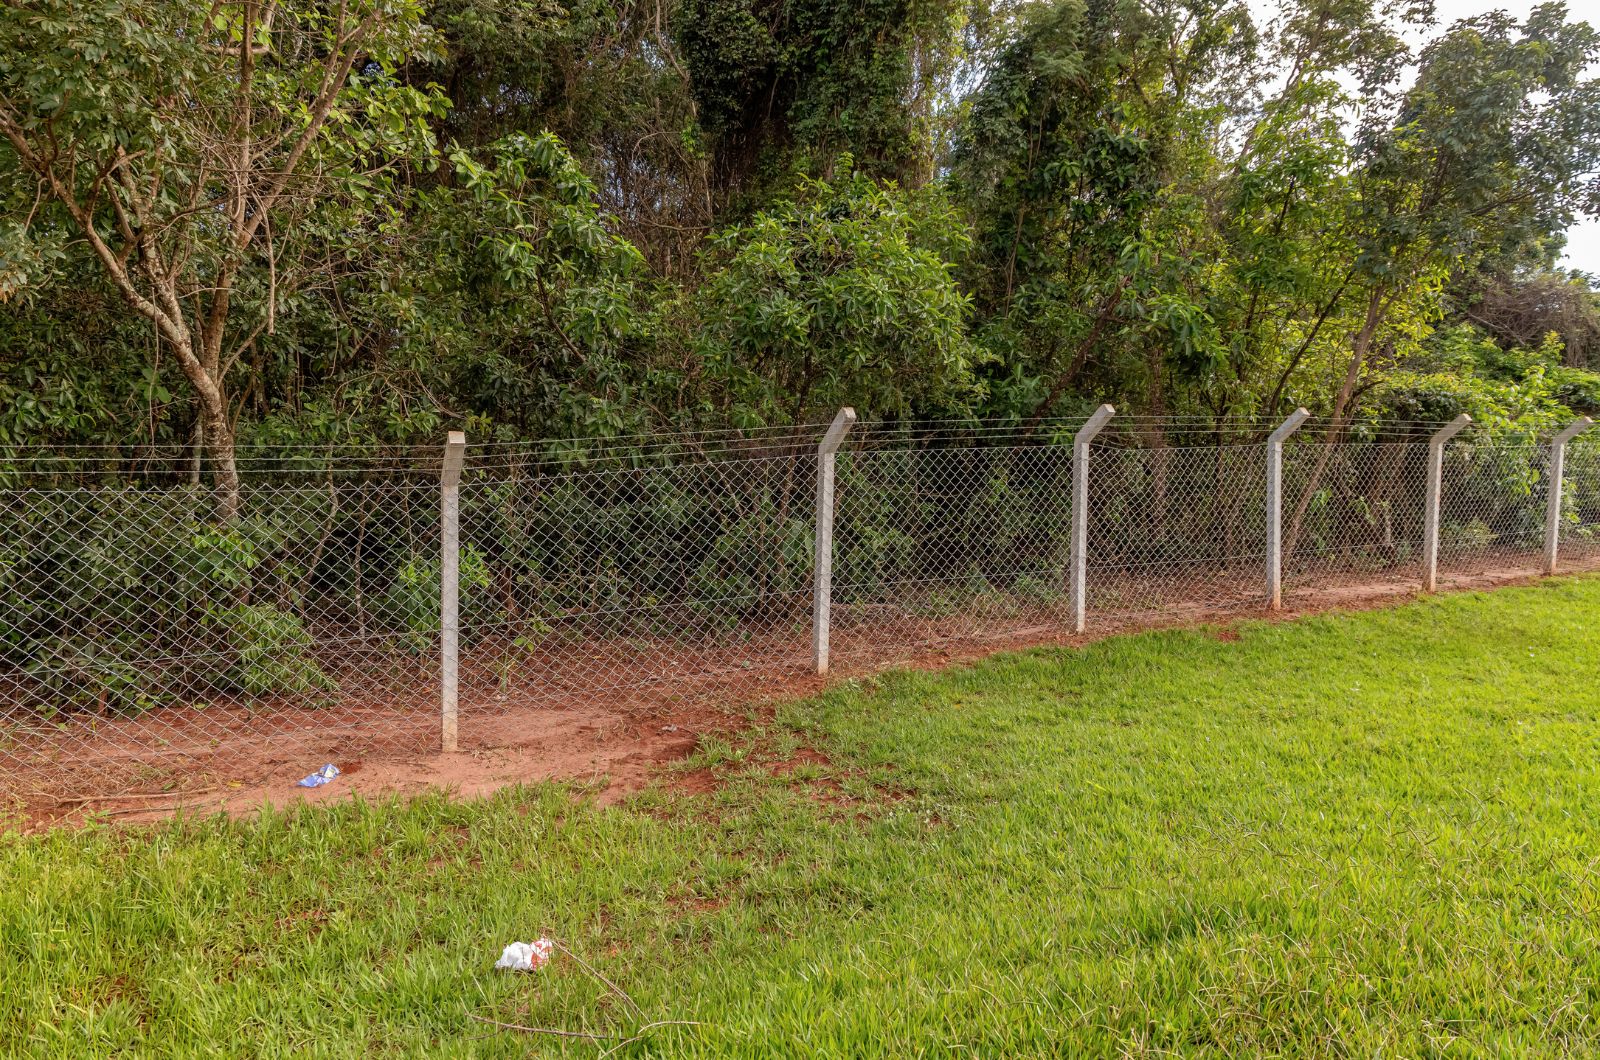 Fence with concrete posts and wire mesh